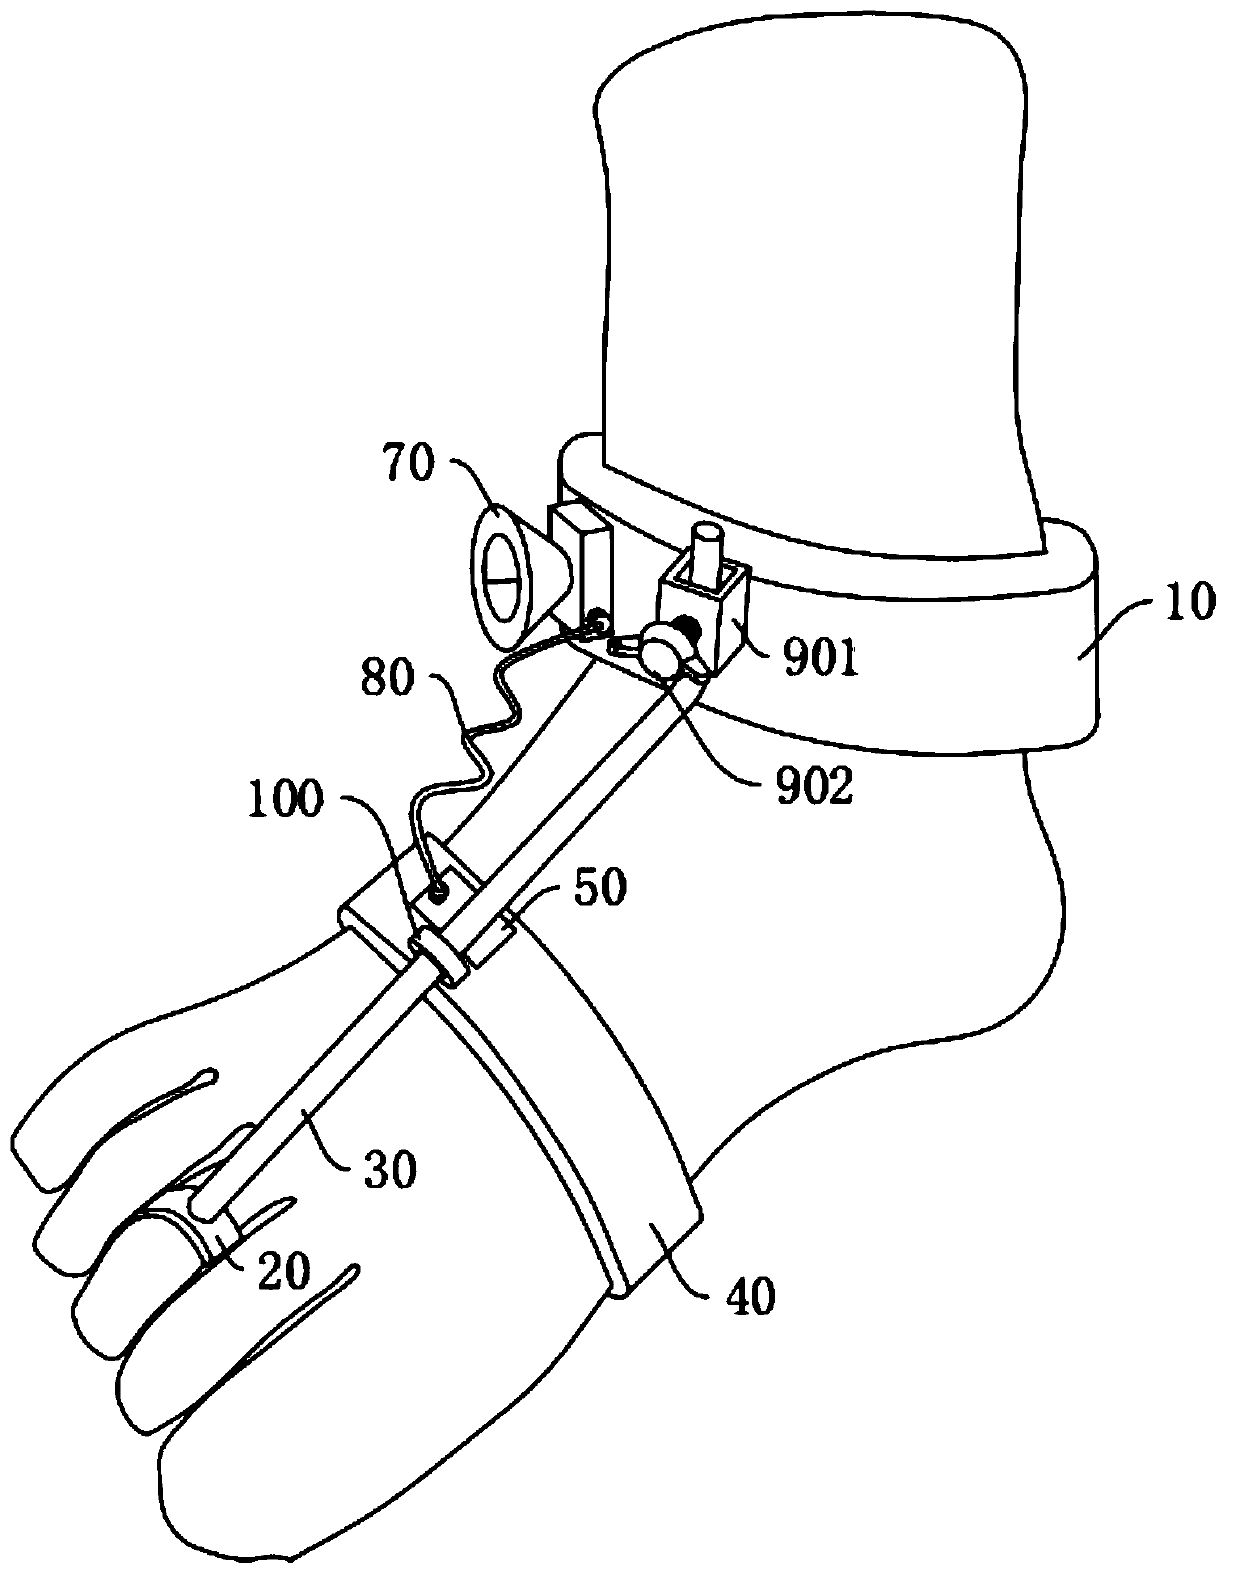 Monitoring device for ankle pump movement